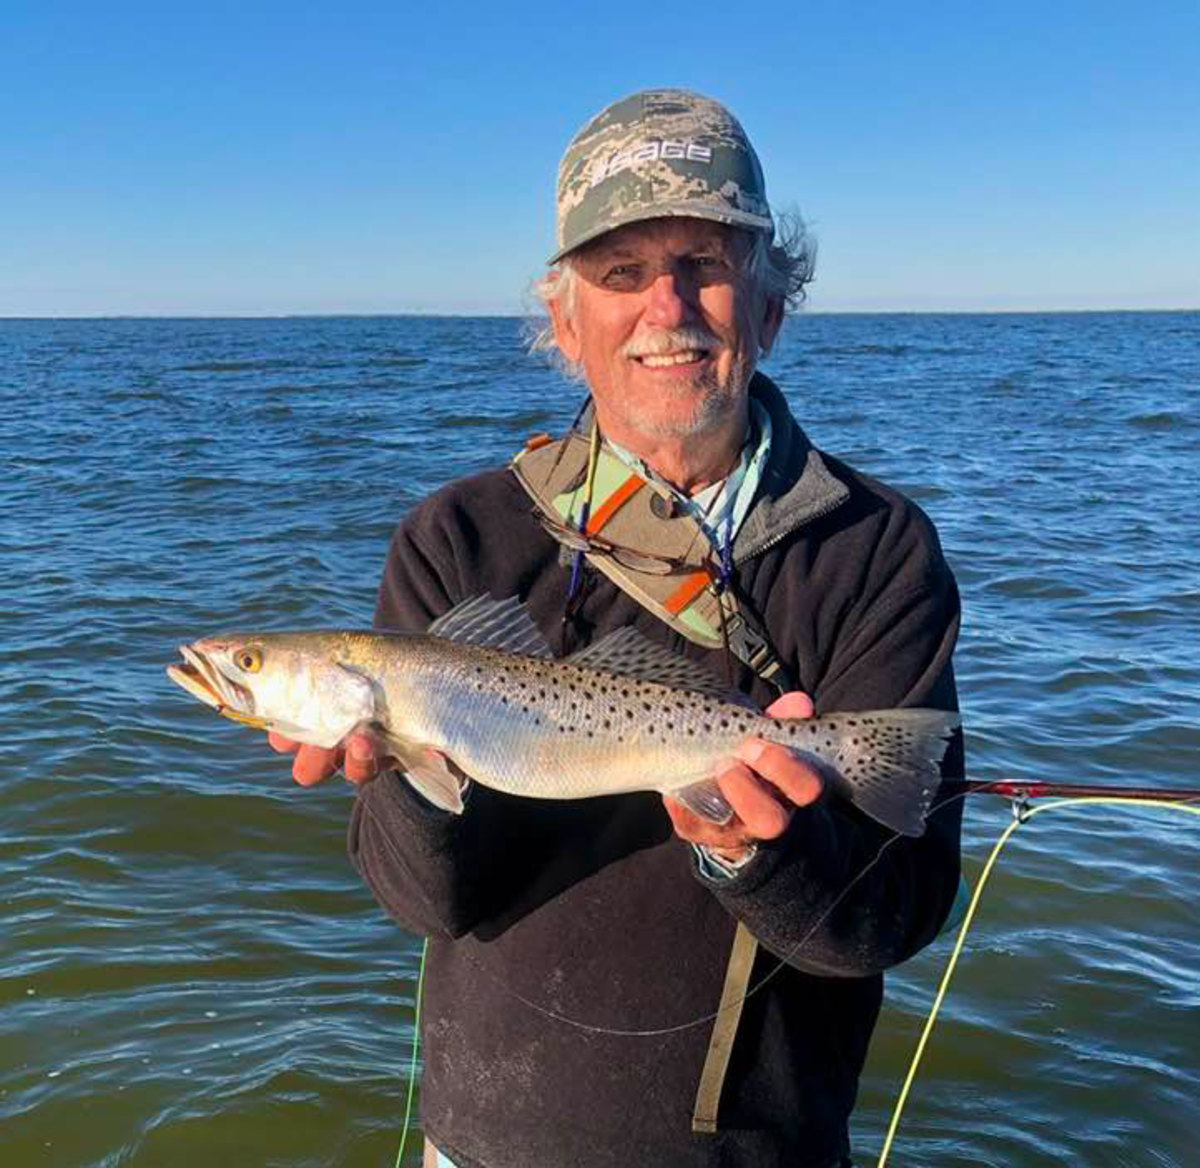 Jon Cave lives in Central Florida and actively fishes for sea trout, redfish, tarpon, snook, shad, bass and whatever else is biting. When he's not fishing, he's thinking about fishing.